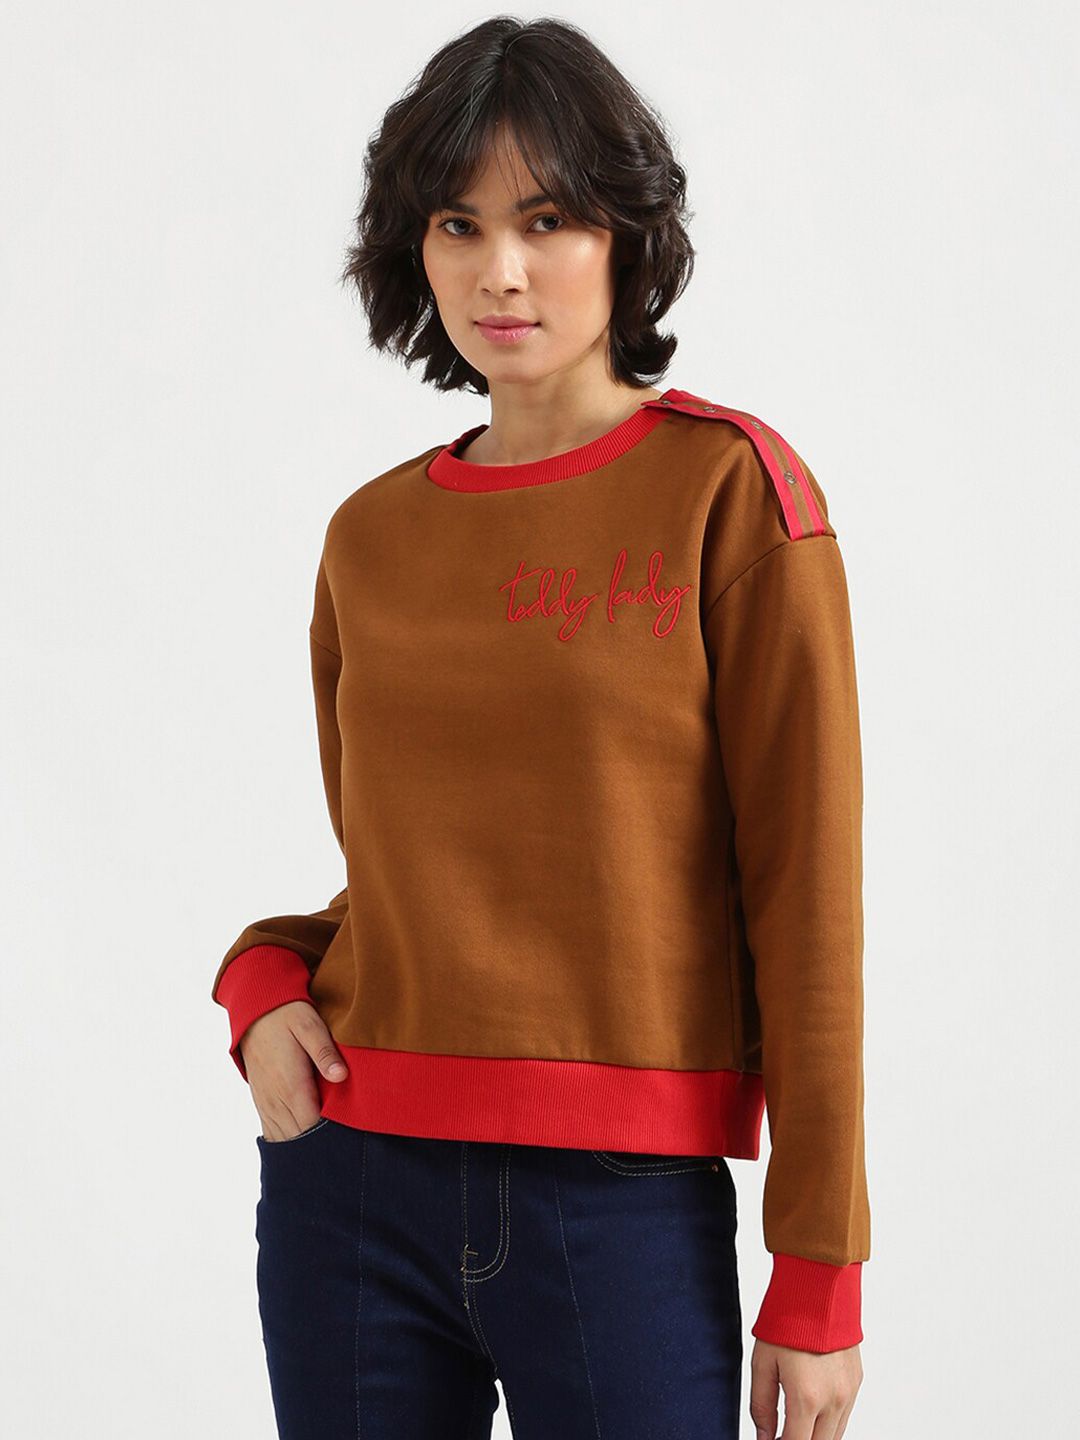 United Colors of Benetton Women Brown & Red   Colourblocked Closed Sweatshirt Price in India